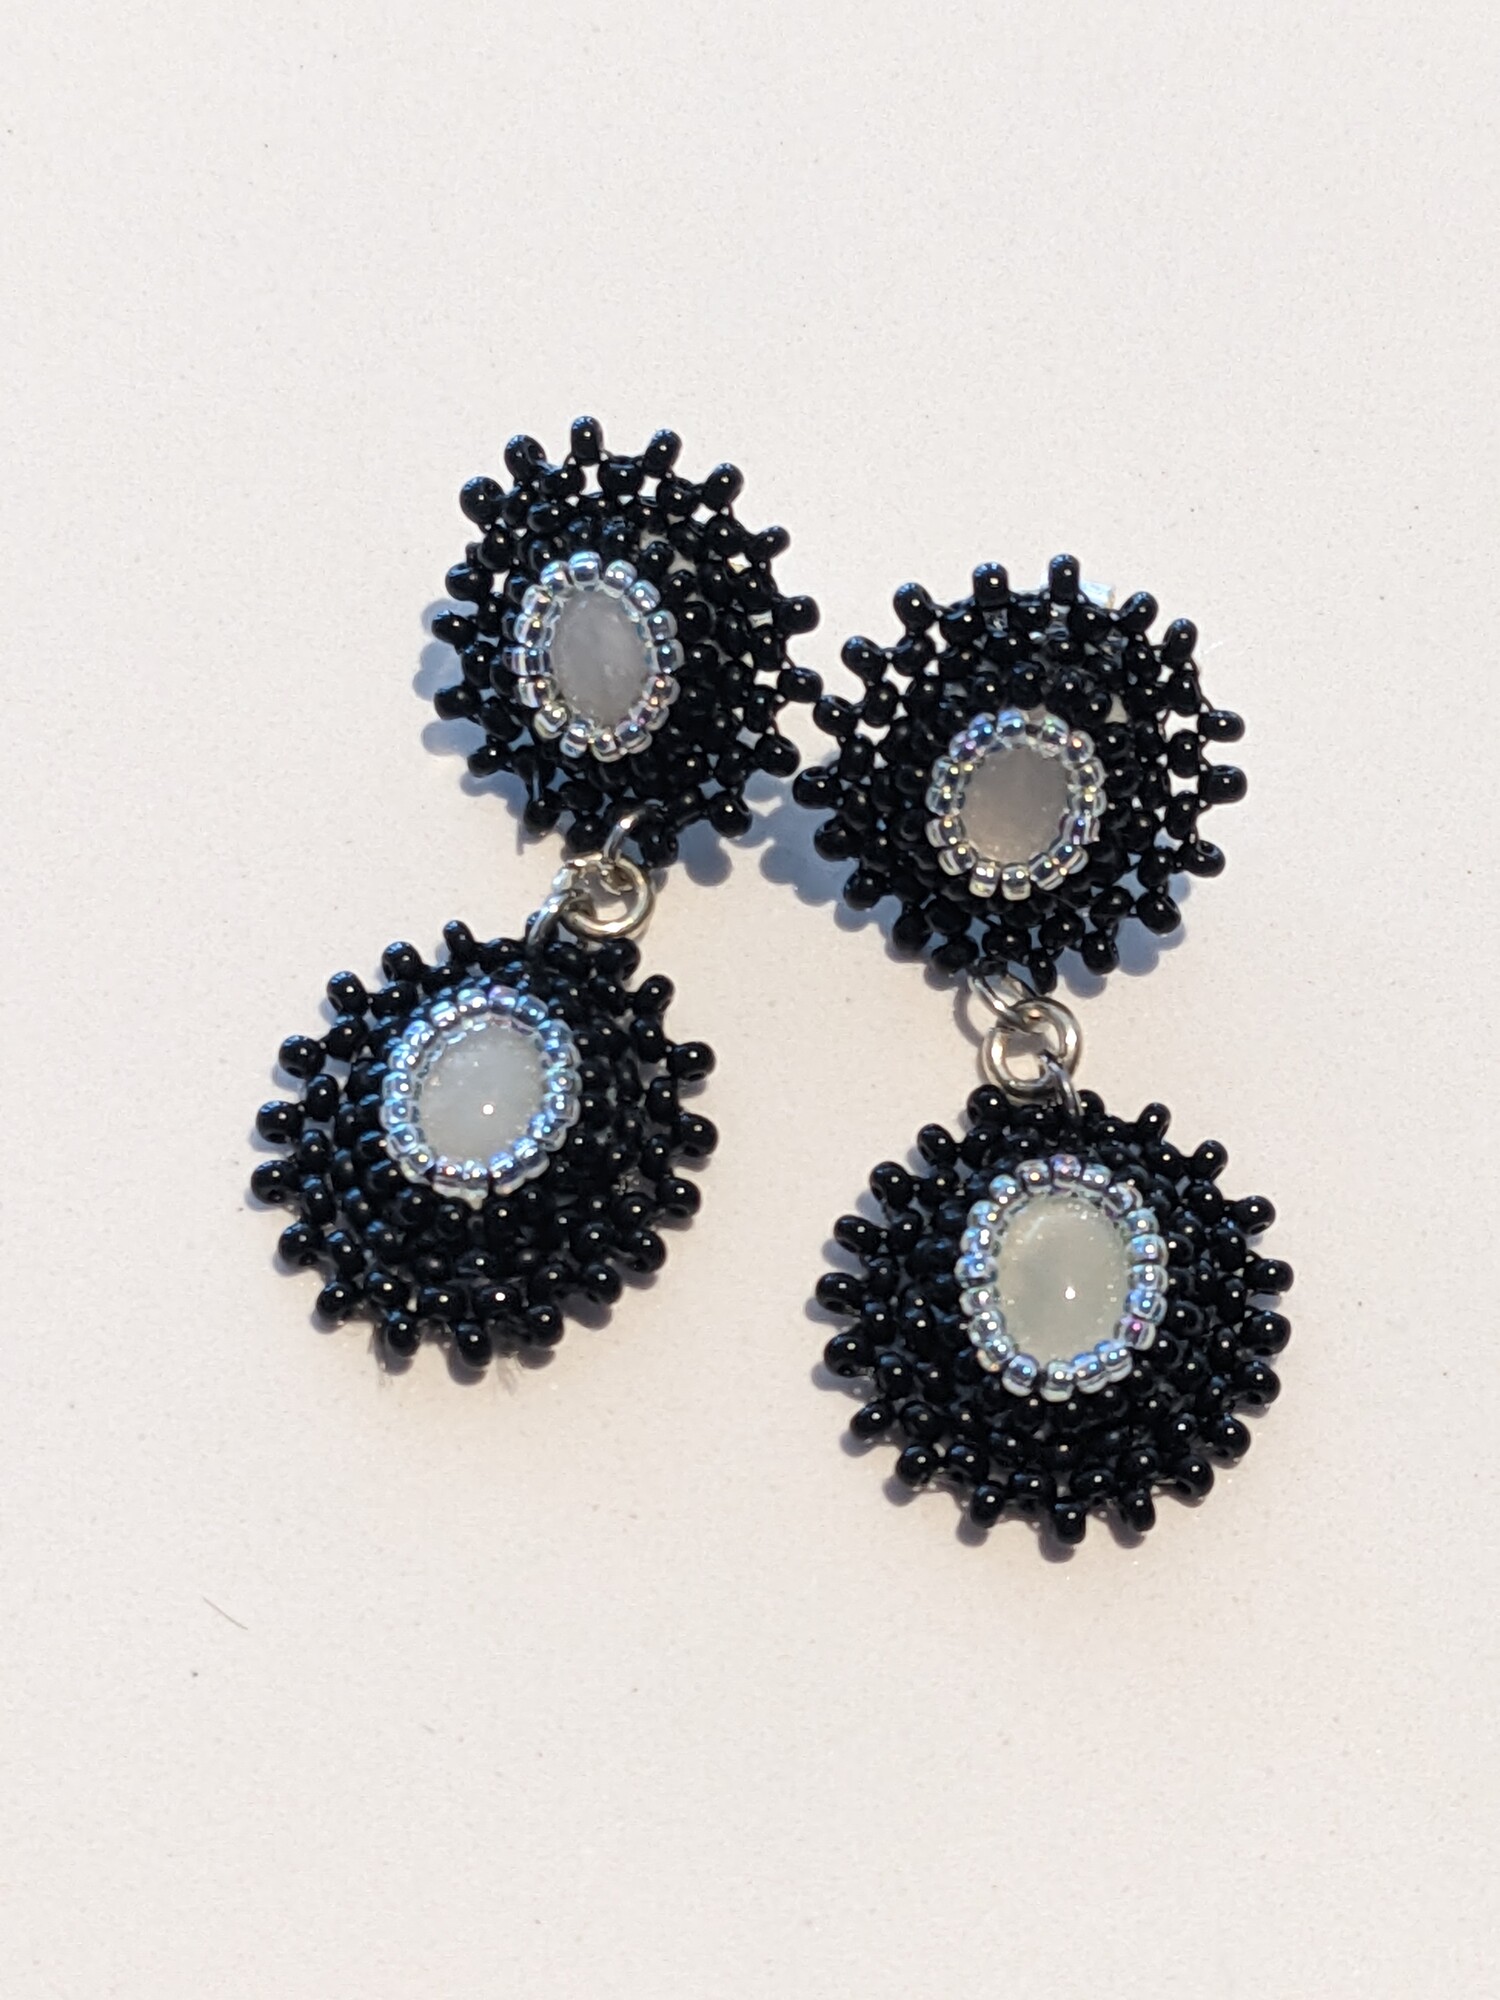 Double Agate Star Earrings
Jama Watts
Jewelry (Bead Embroidery)
2.25 in long by .75 in wide
Two white agate cabochons surrounded by black and silver-lined seed beads.  Backed by black leather.  Stainless steel posts.